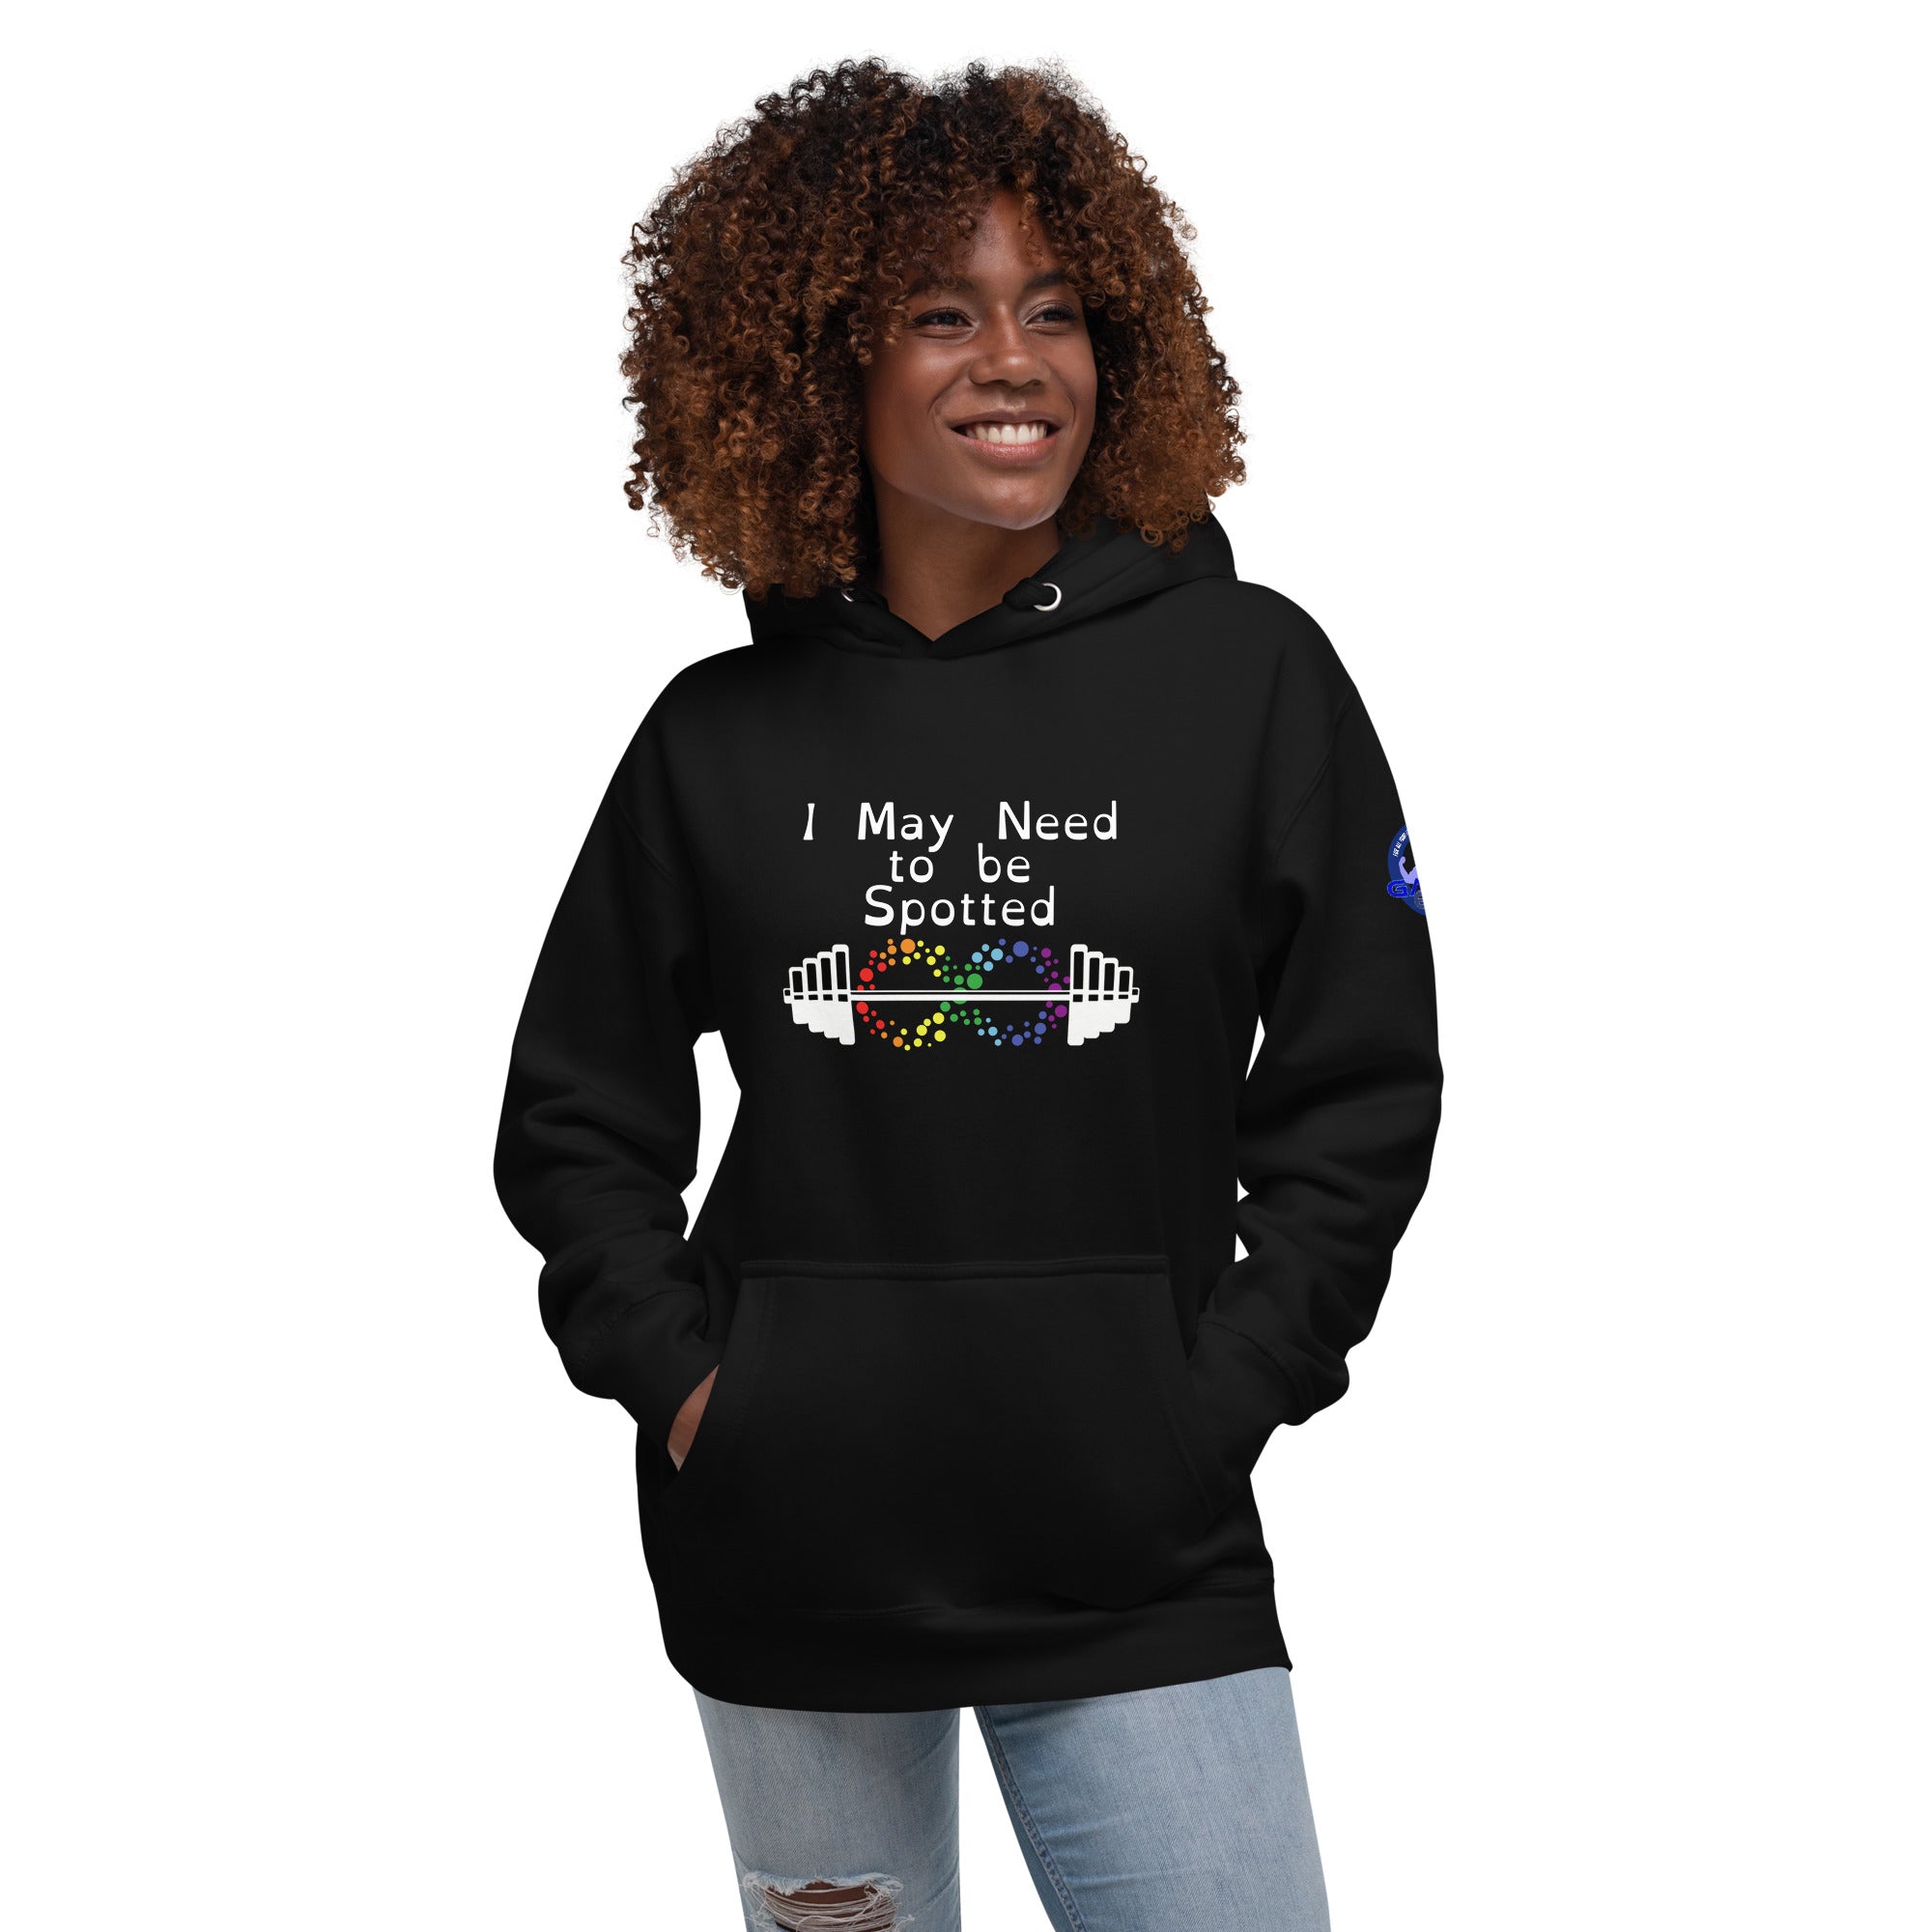 I May Need to be Spotted Unisex Hoodie